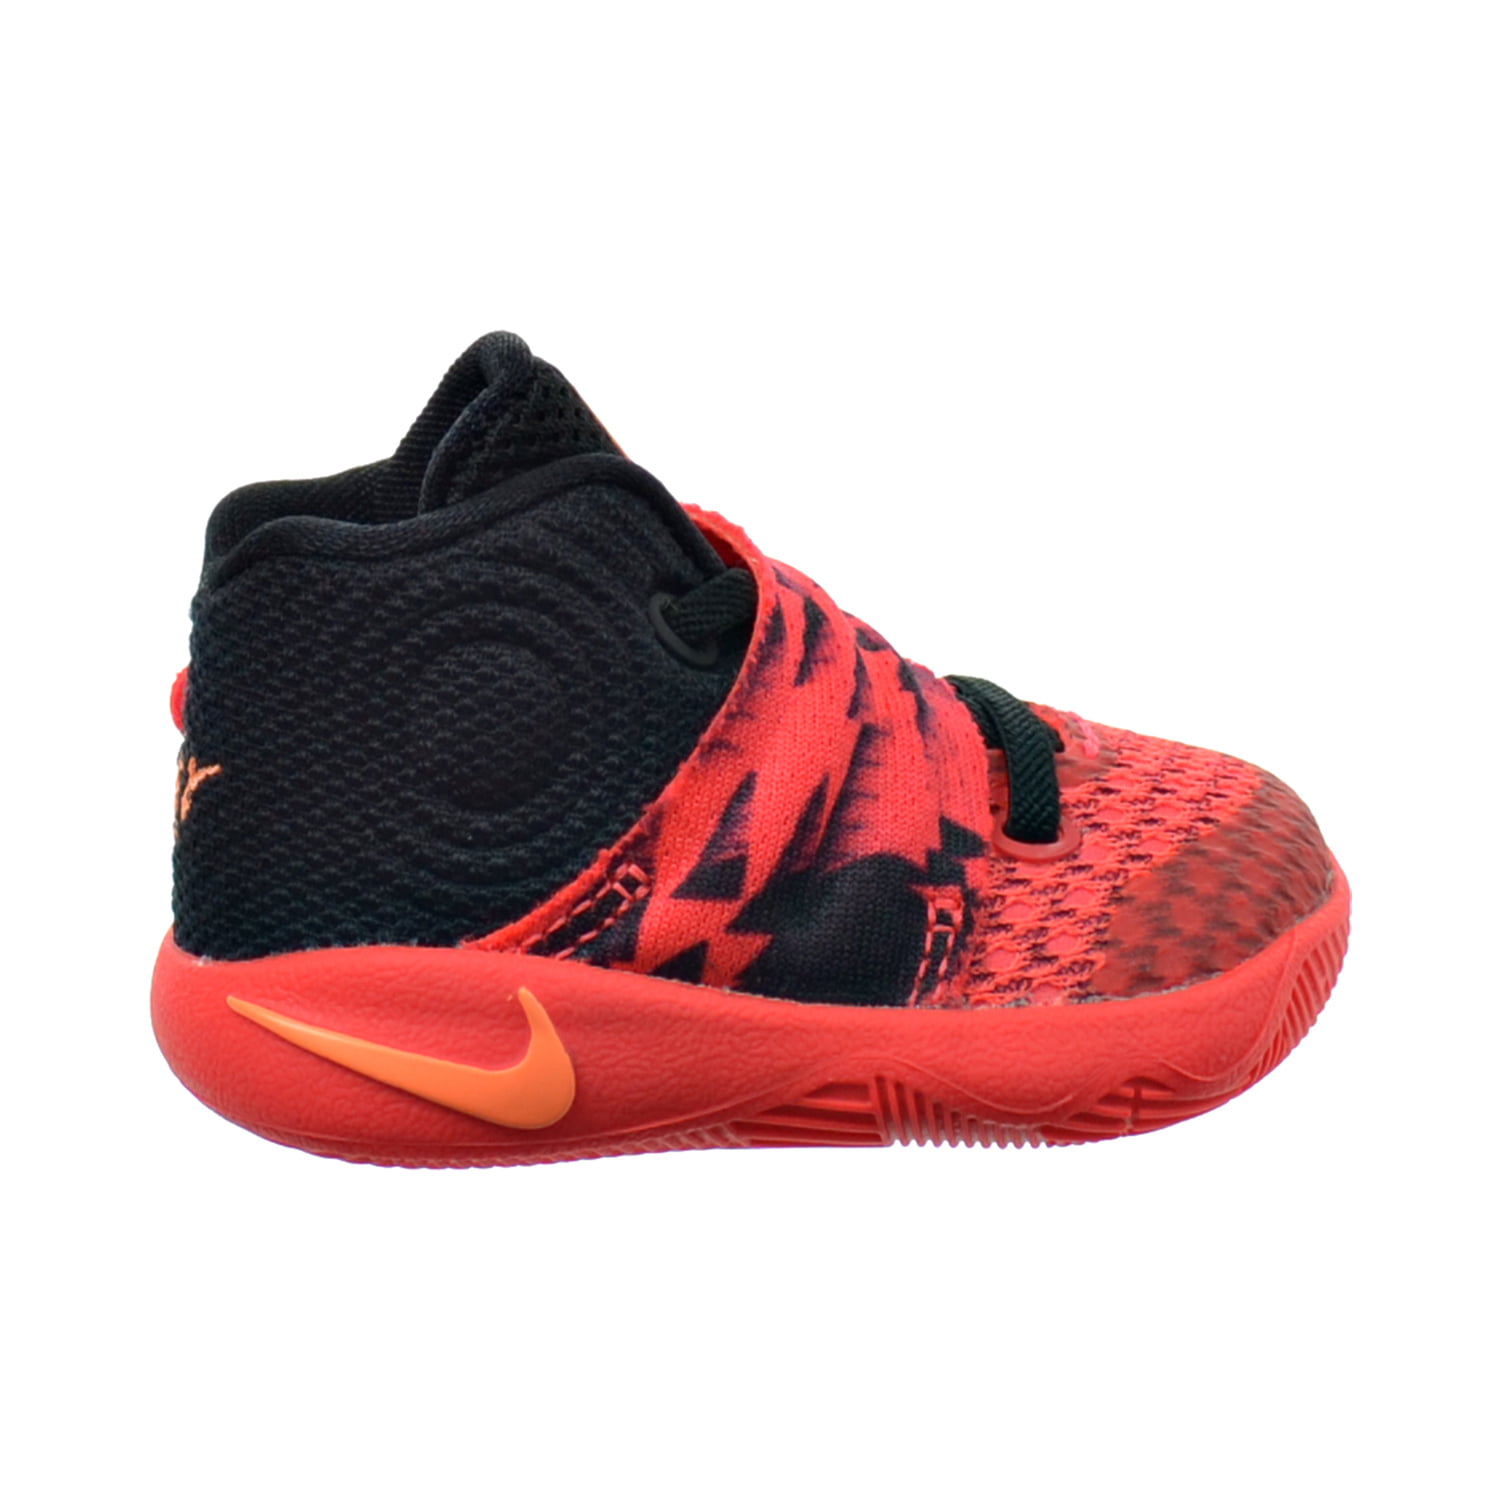 kyrie 2 toddler shoes